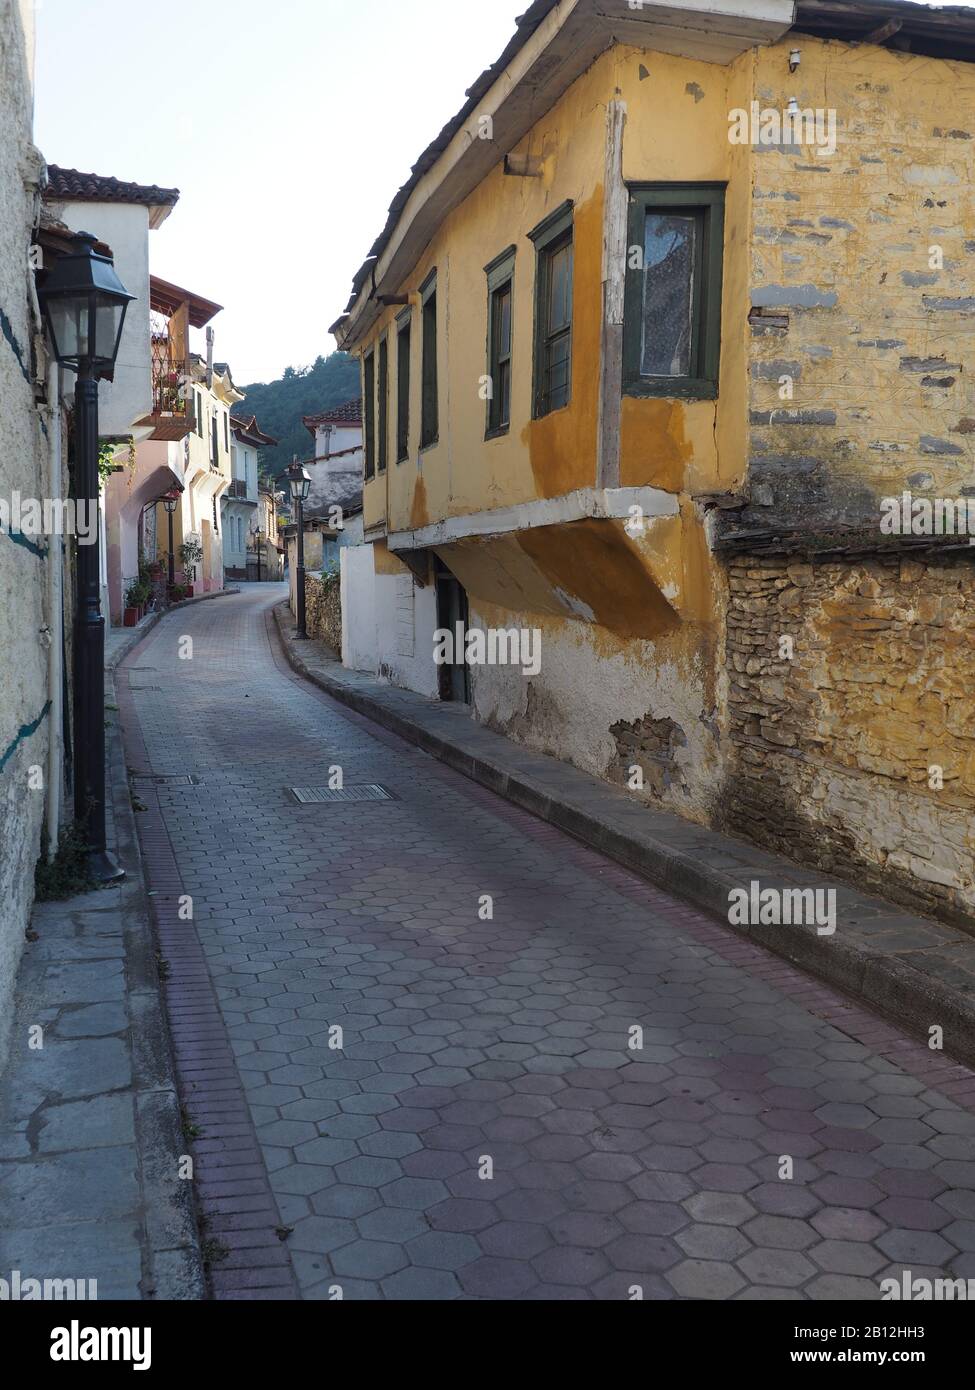 Street scene in Eleftheroupoli, Pangaio, East Macedonia and Thrace, Greece showing old, traditional buildings, some needing repair. Stock Photo